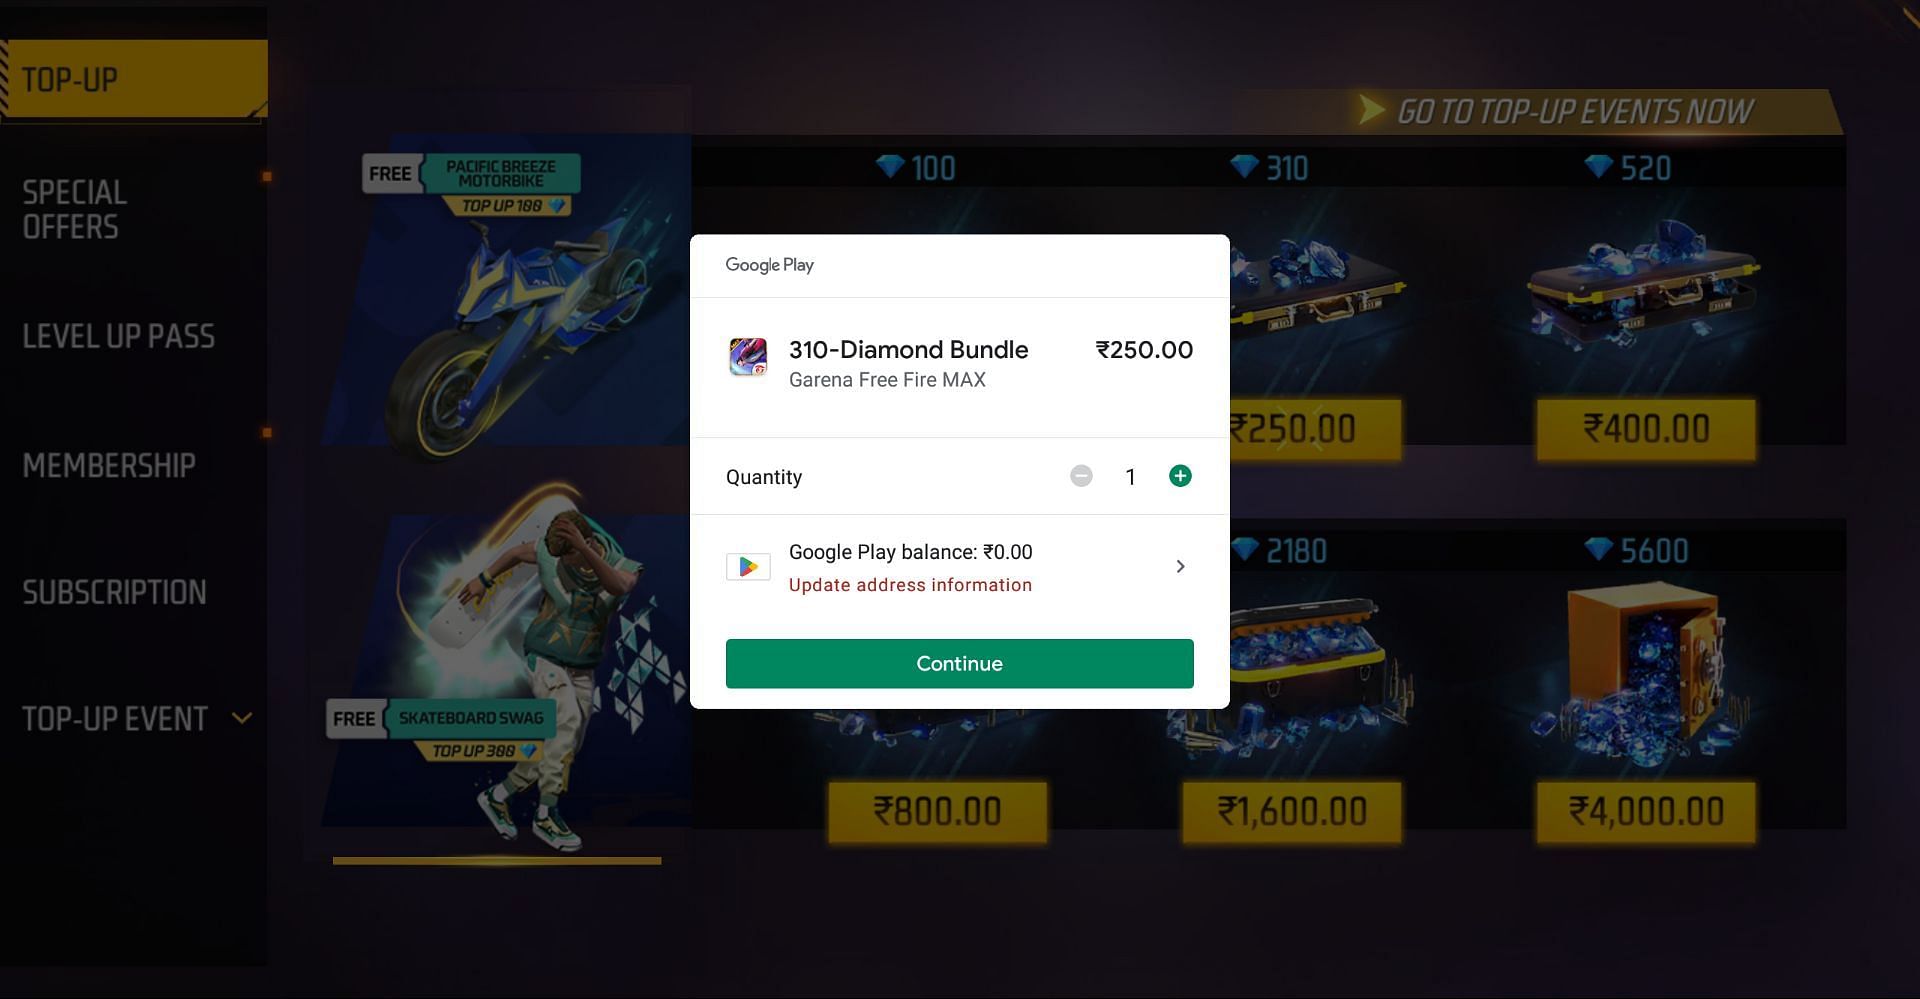 Make the payment to receive the in-game currency (Image via Garena)